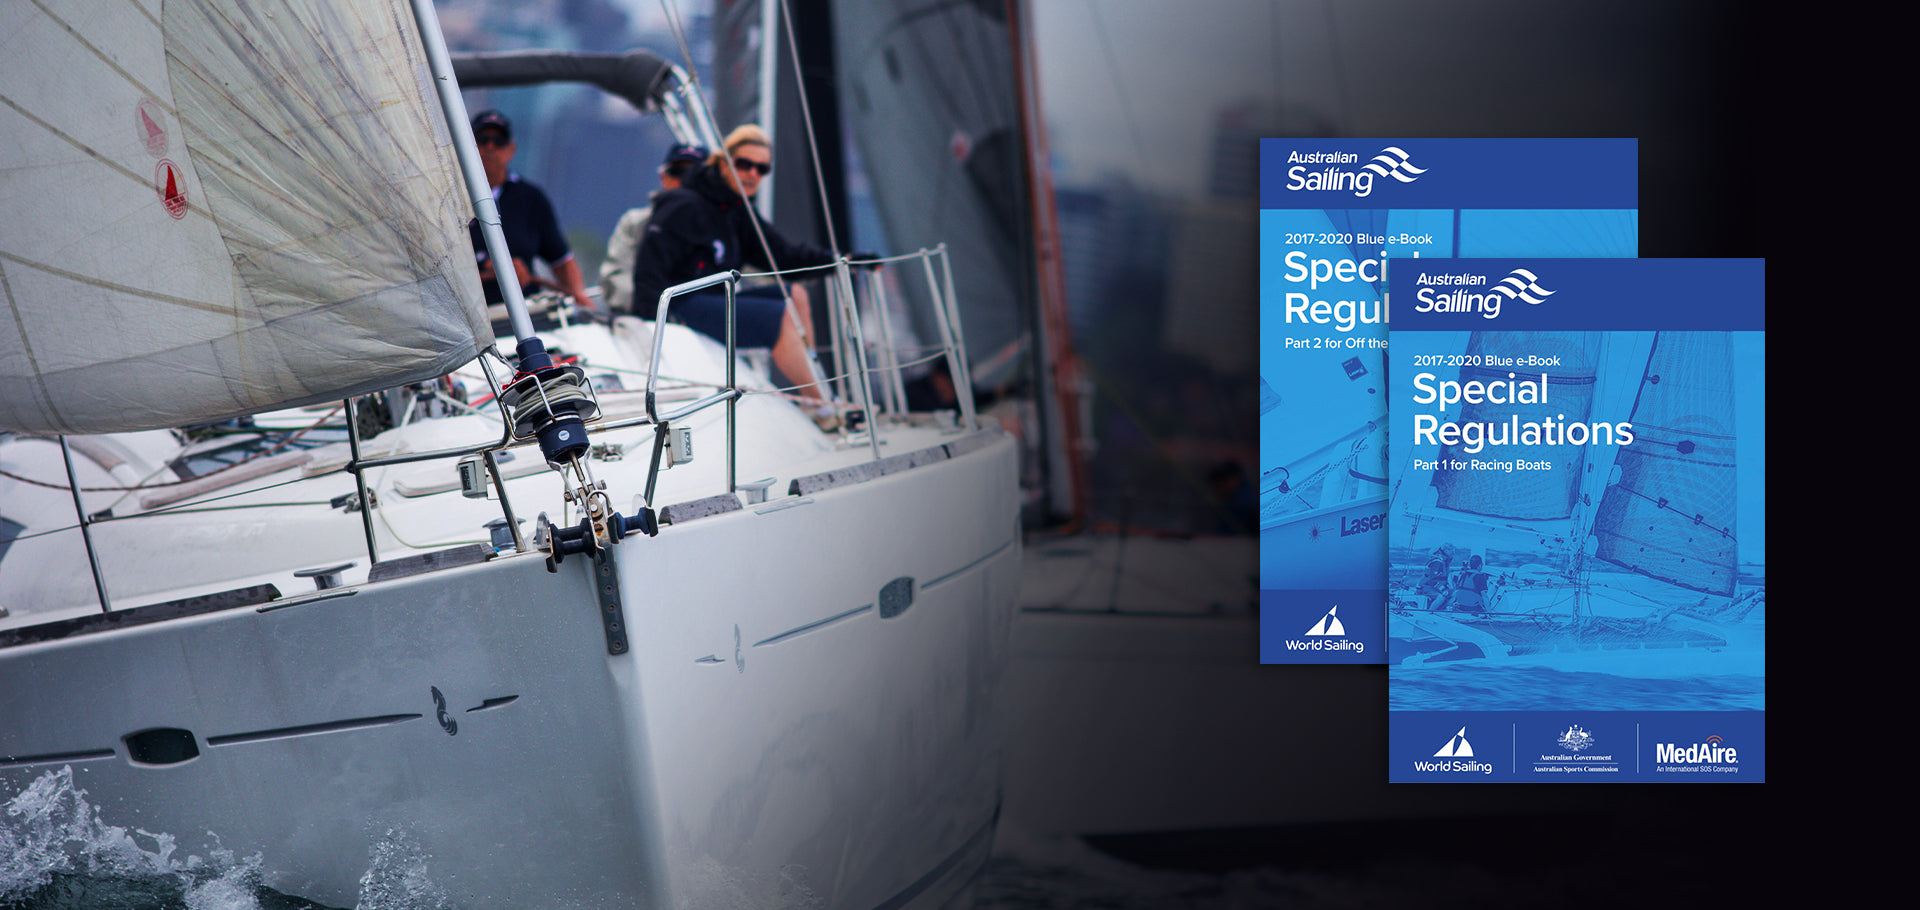 yachting australia special regulations